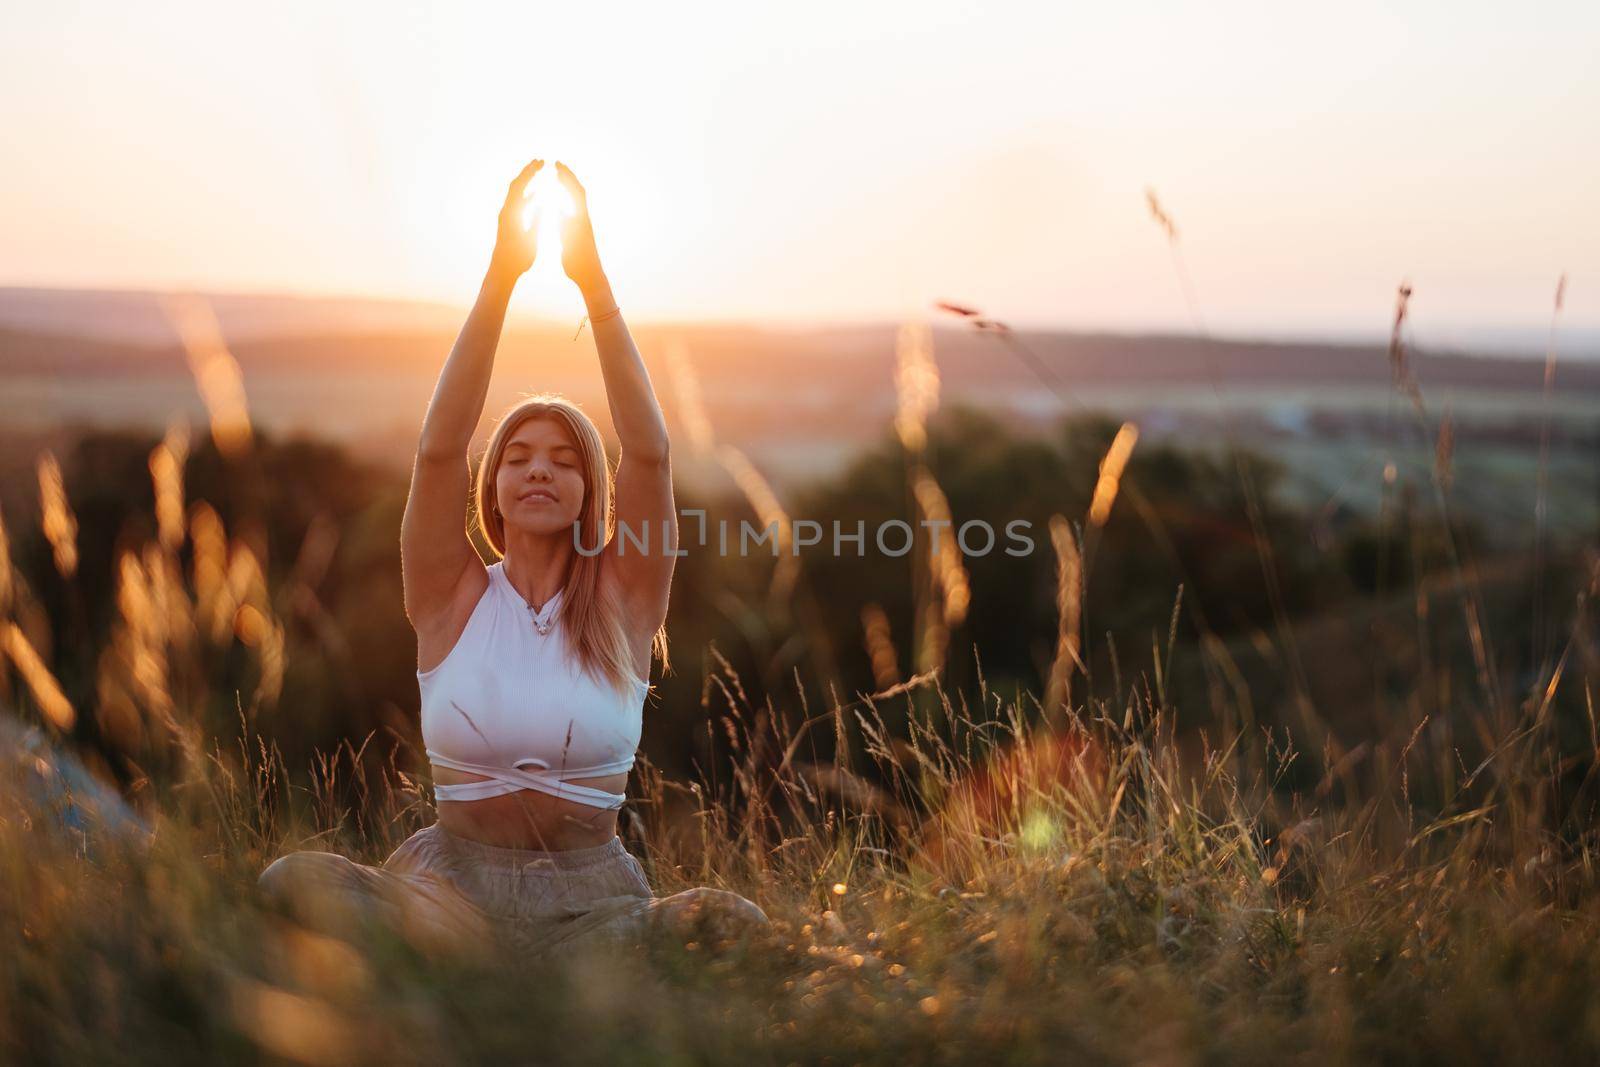 Young Woman Sitting in Meditation Yoga Pose and Catching Sun by Hands at Sunset by Romvy